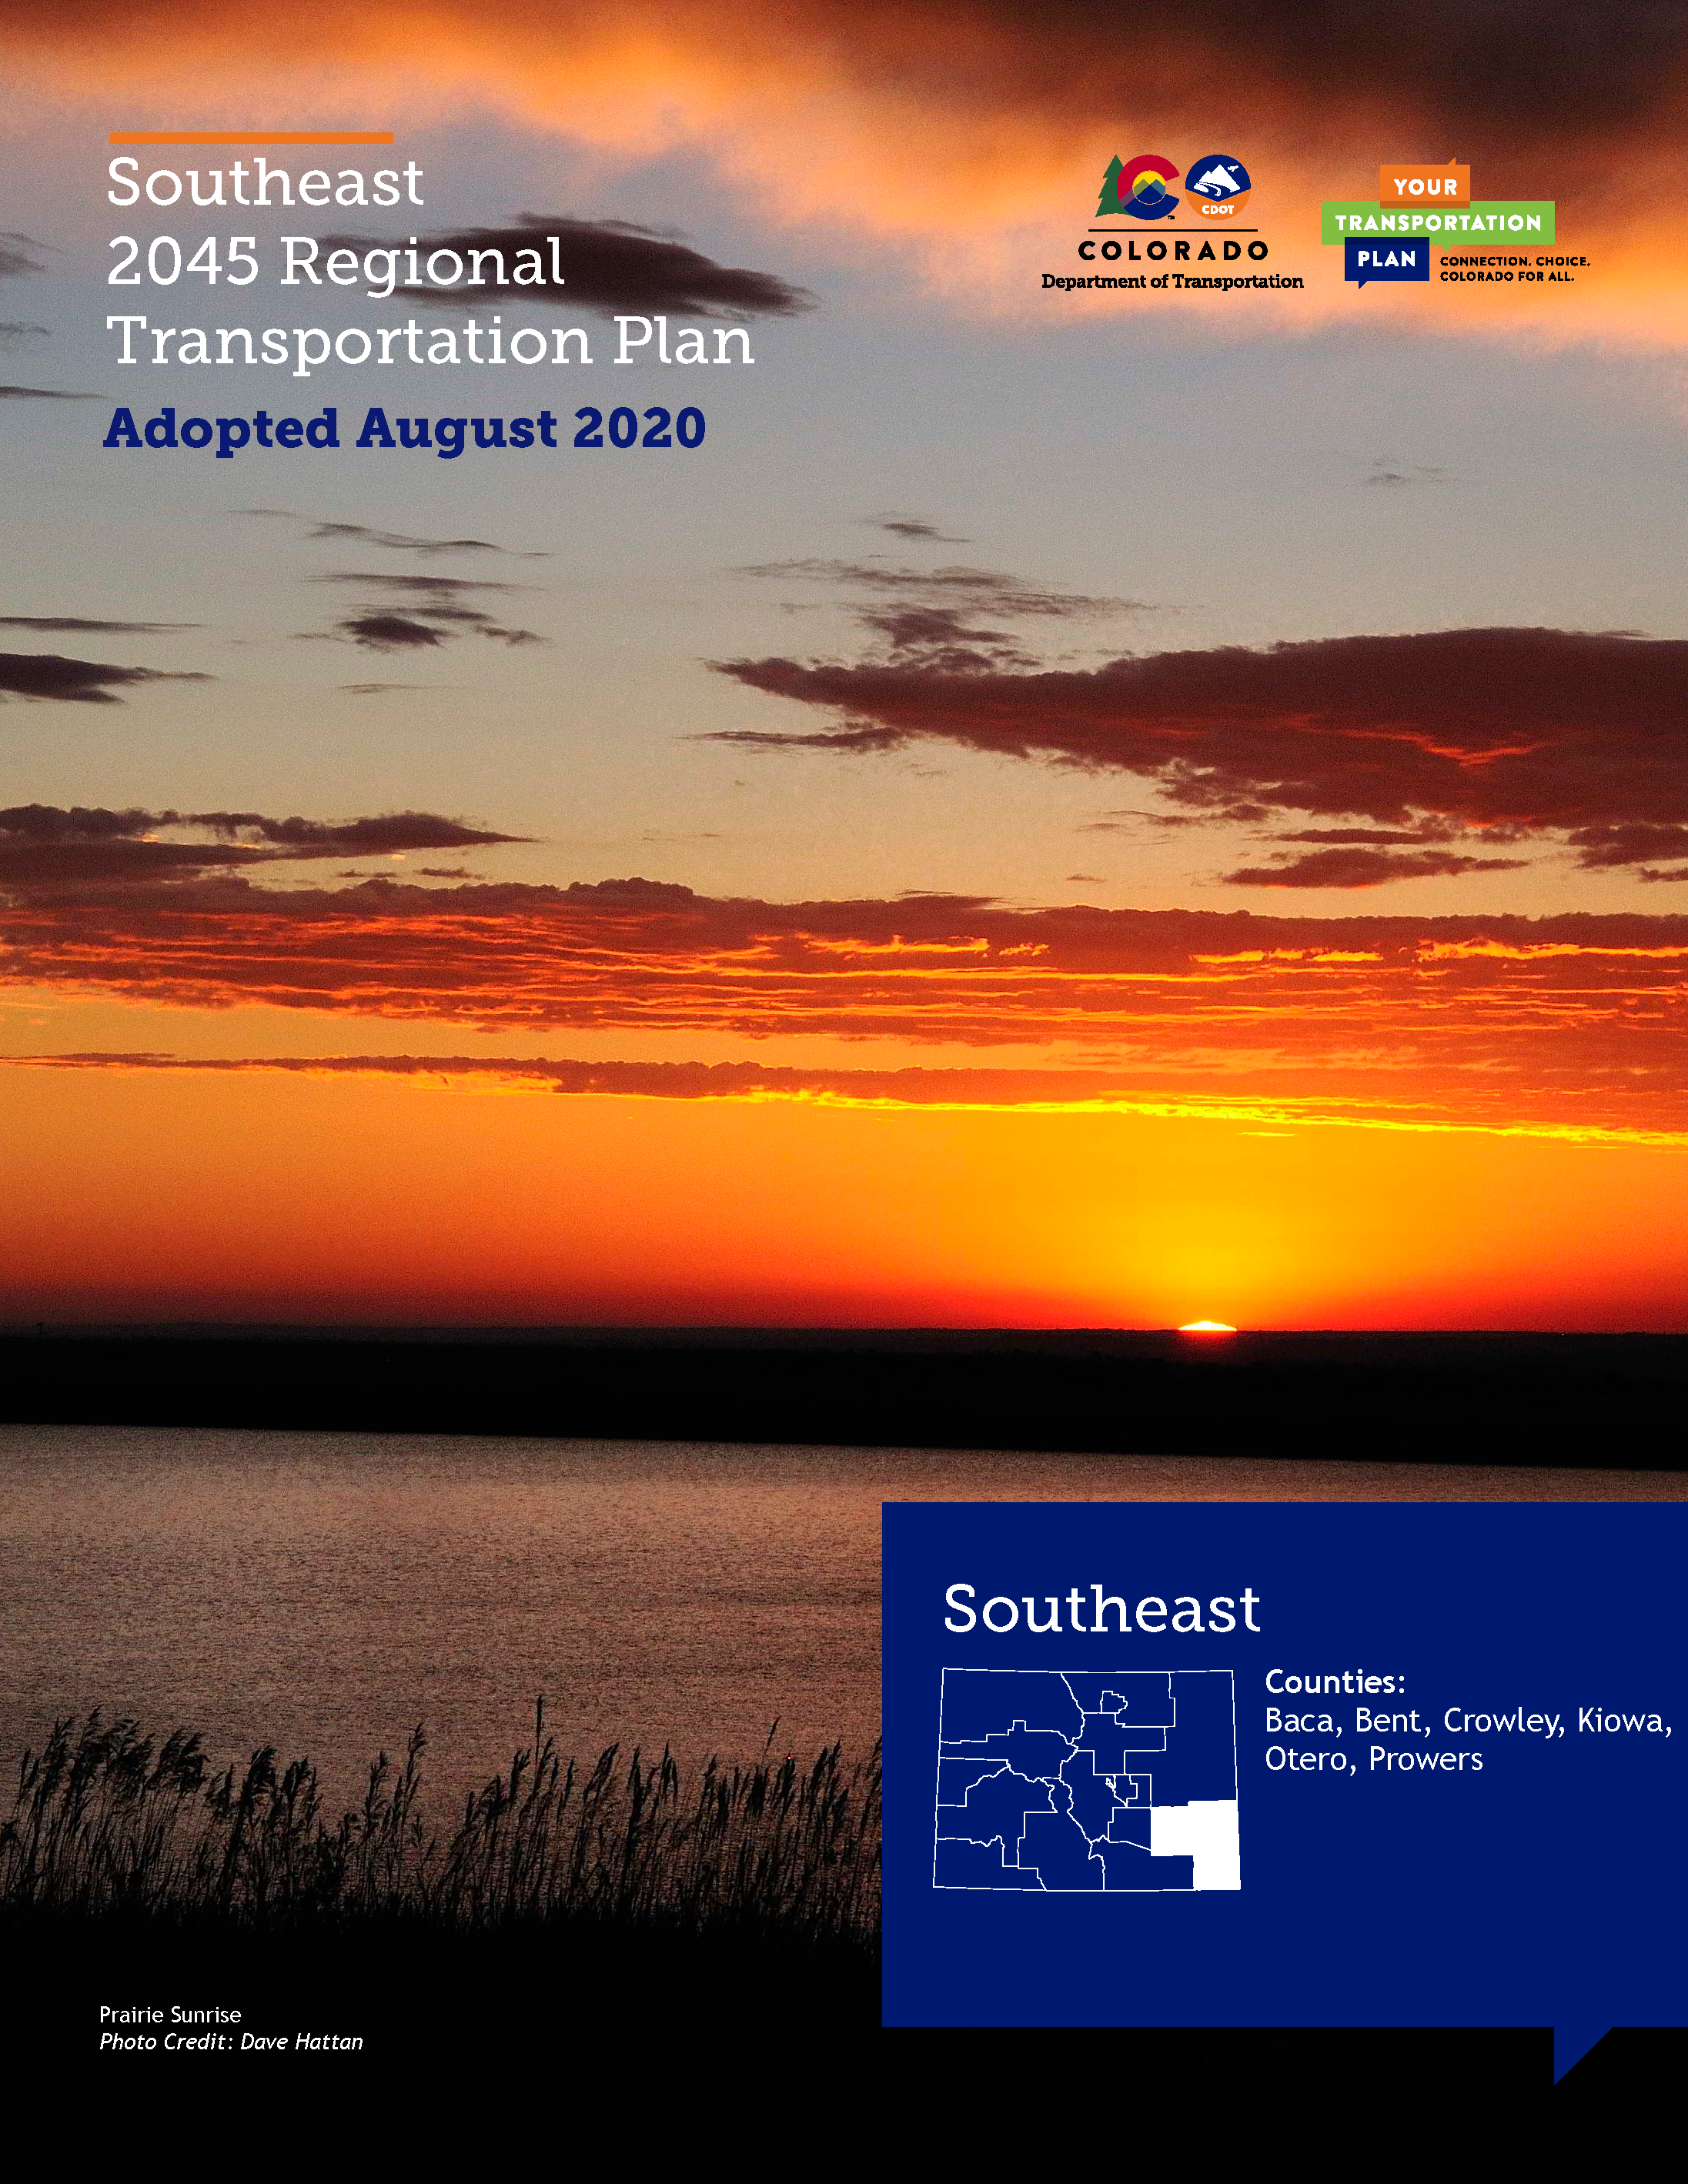 Southeast_Cover.jpg detail image